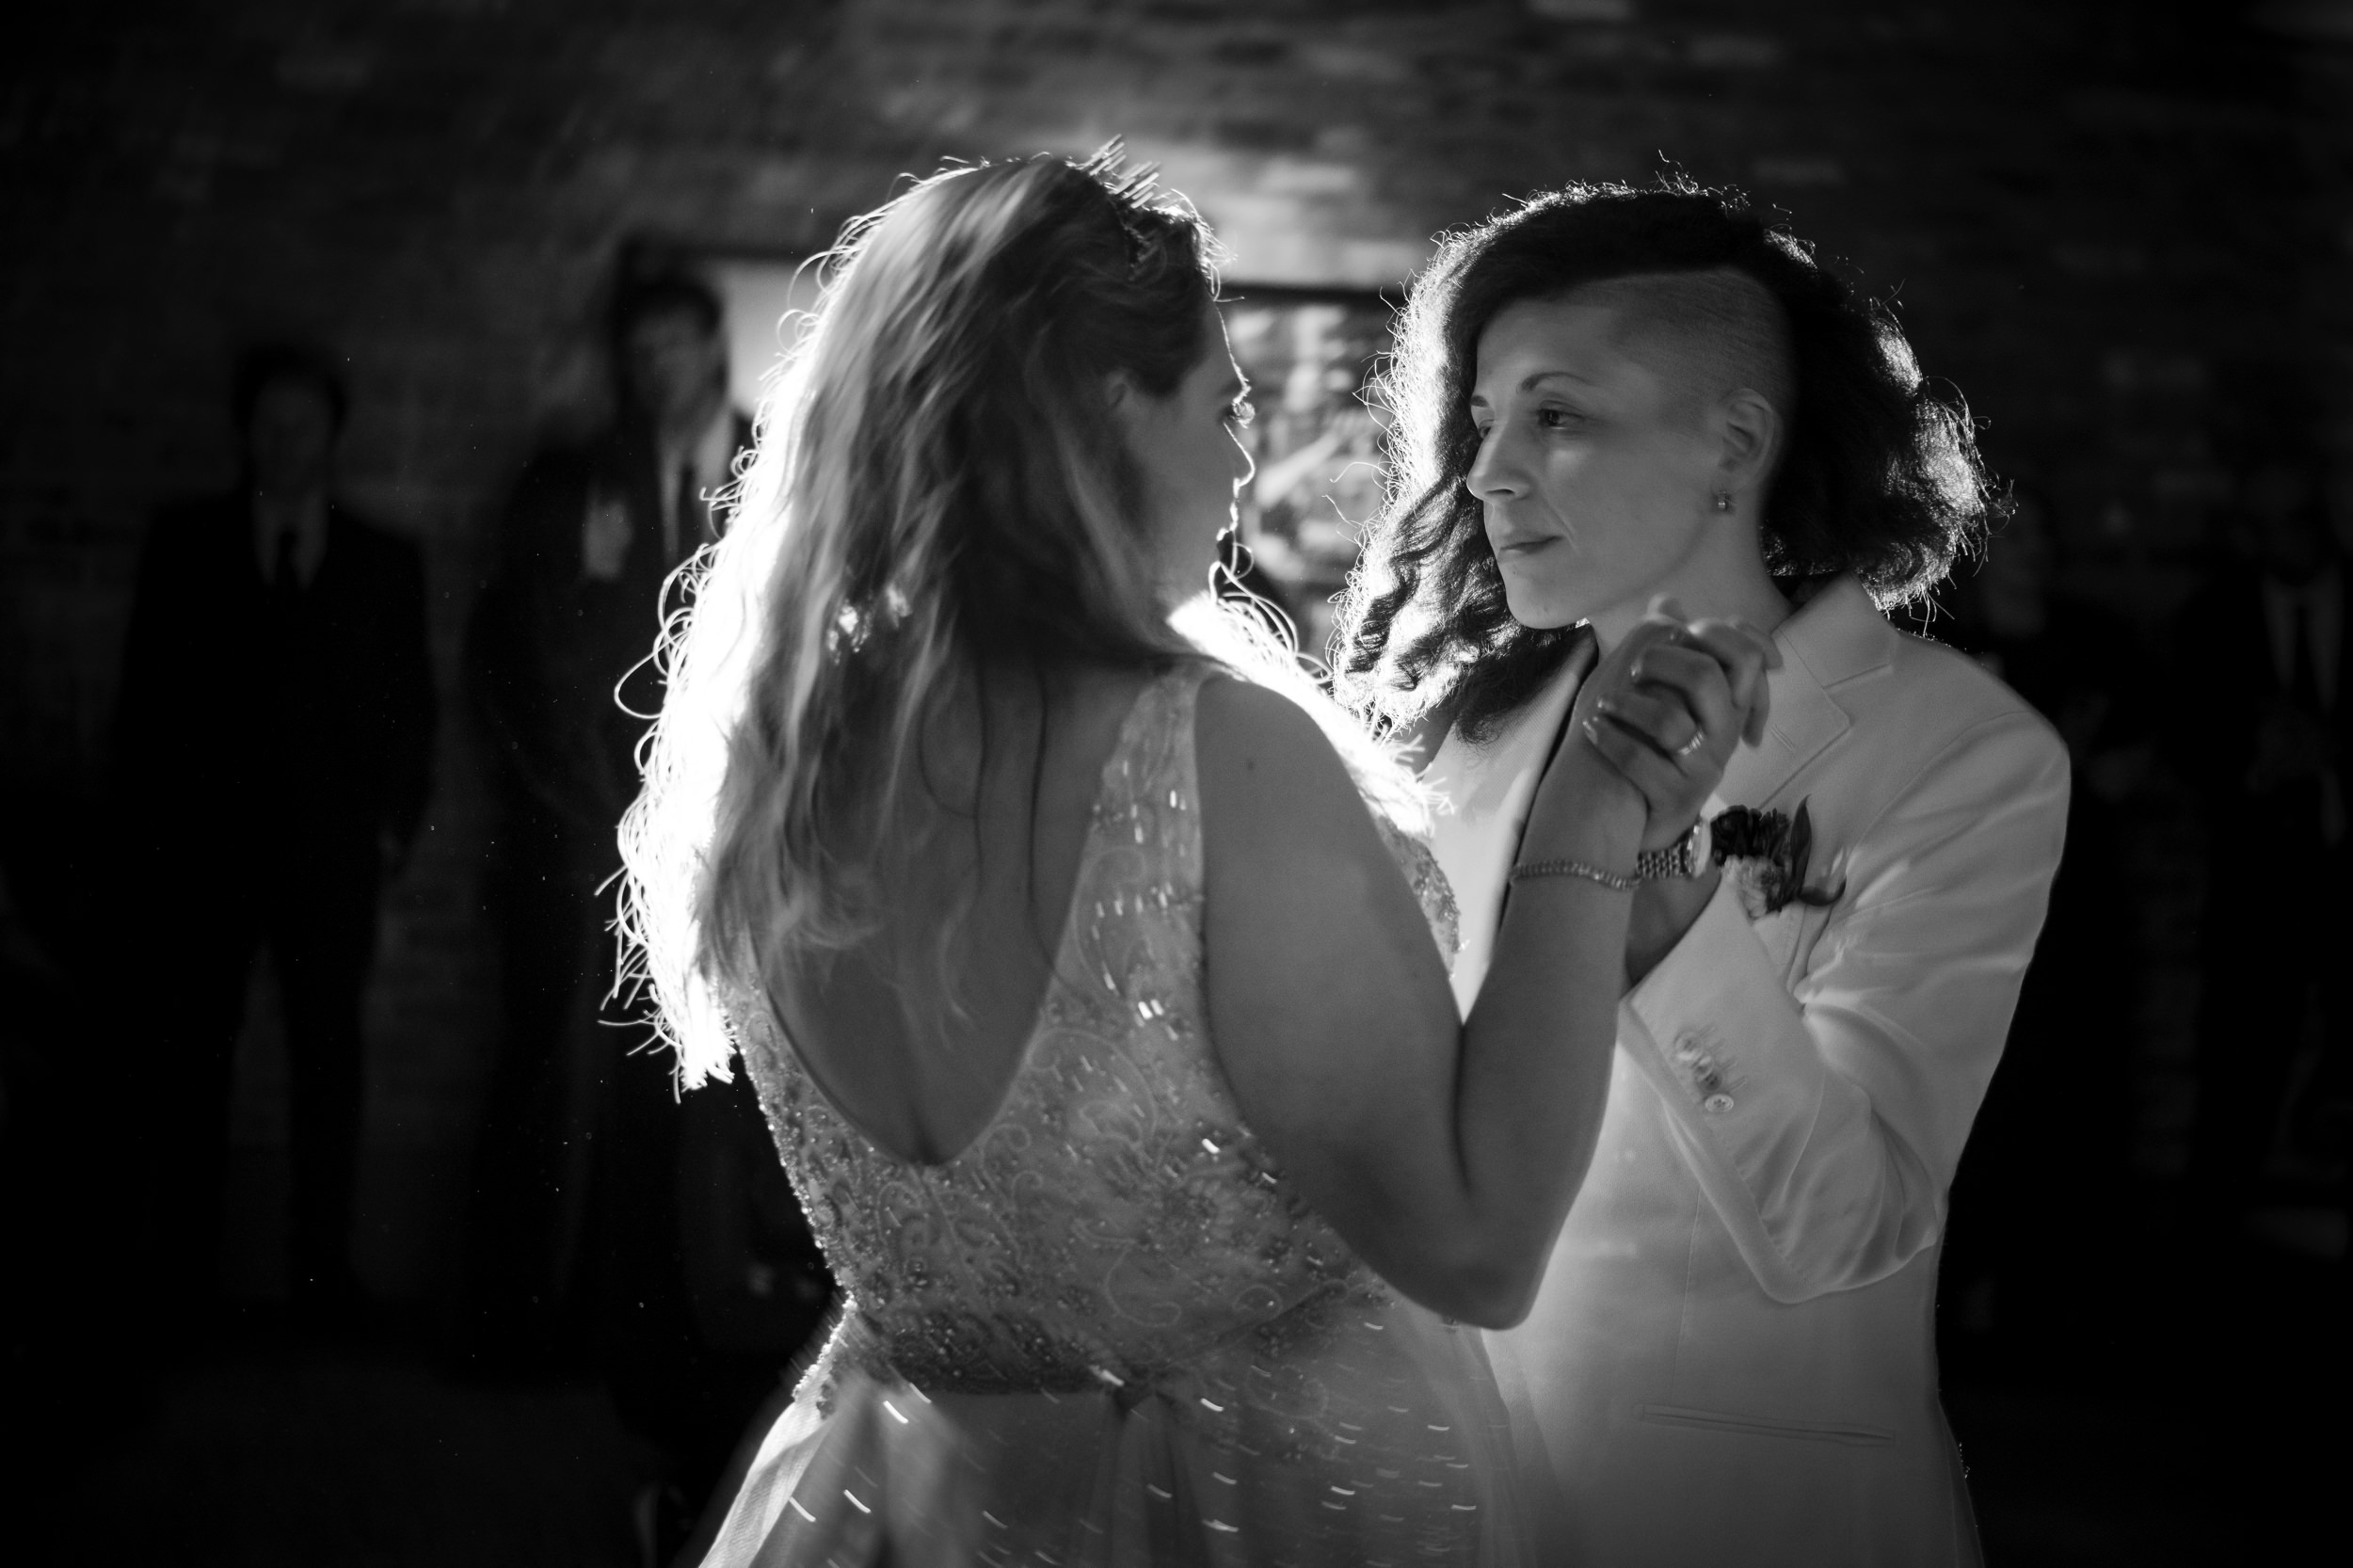 Brides having their first dance at a Beekman Hotel wedding in NYC